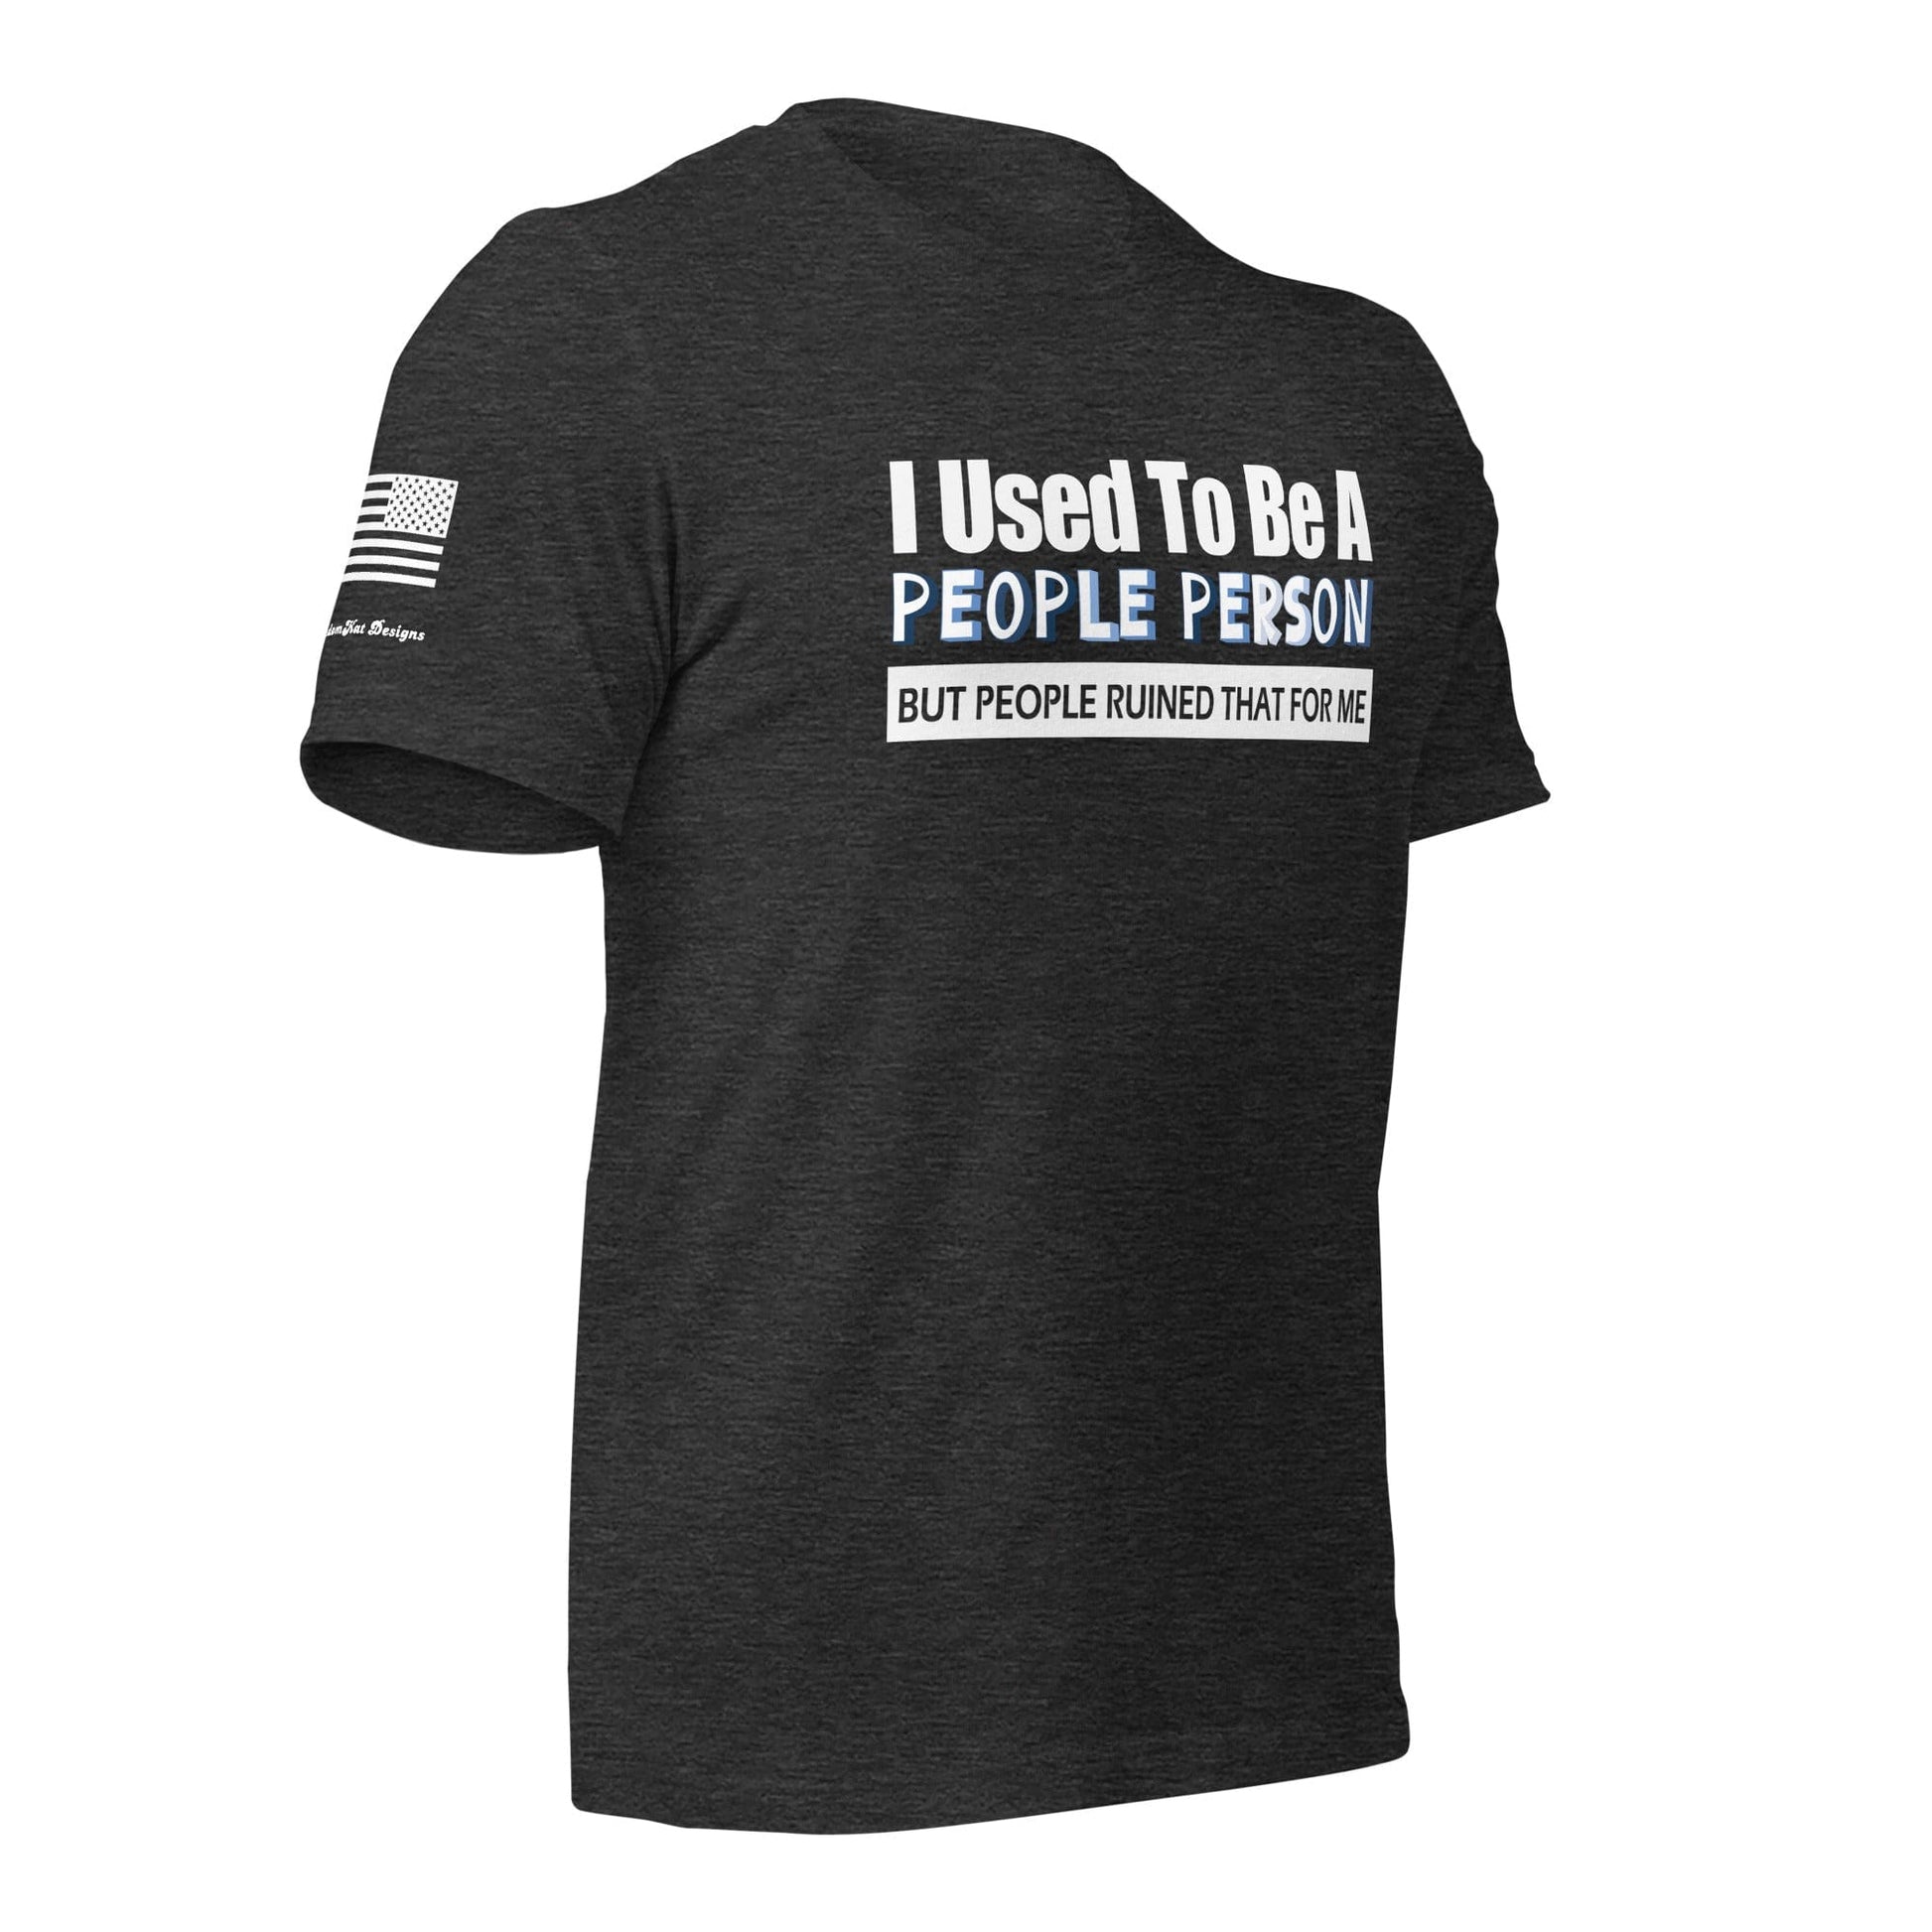 FreedomKat Designs, LLC I used to be a people person t-shirt